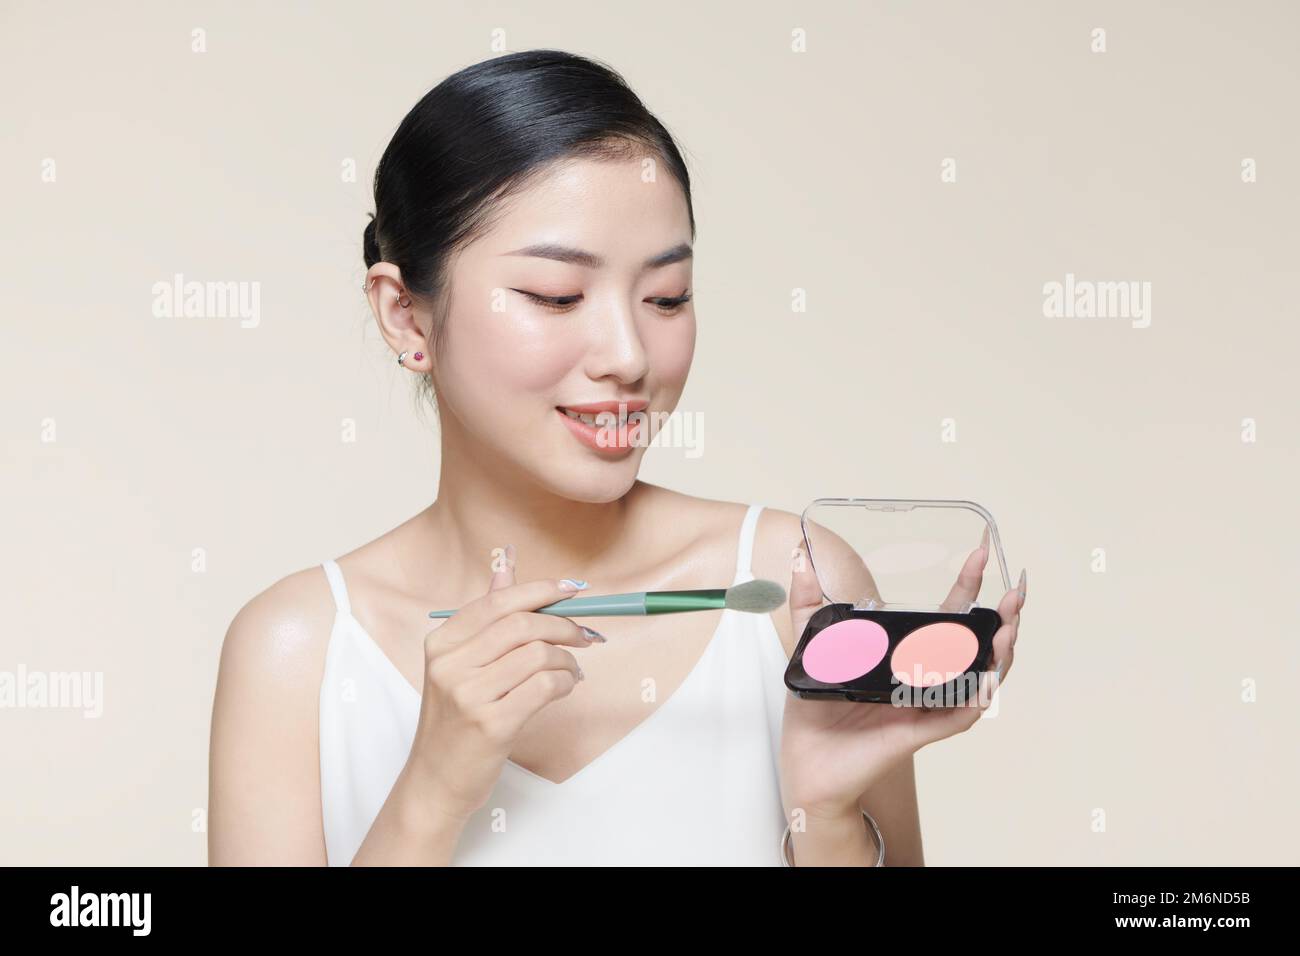 Portrait of stylish trendy modern girl with beaming smile gesturing new quality shadow having palette and brush in hands Stock Photo